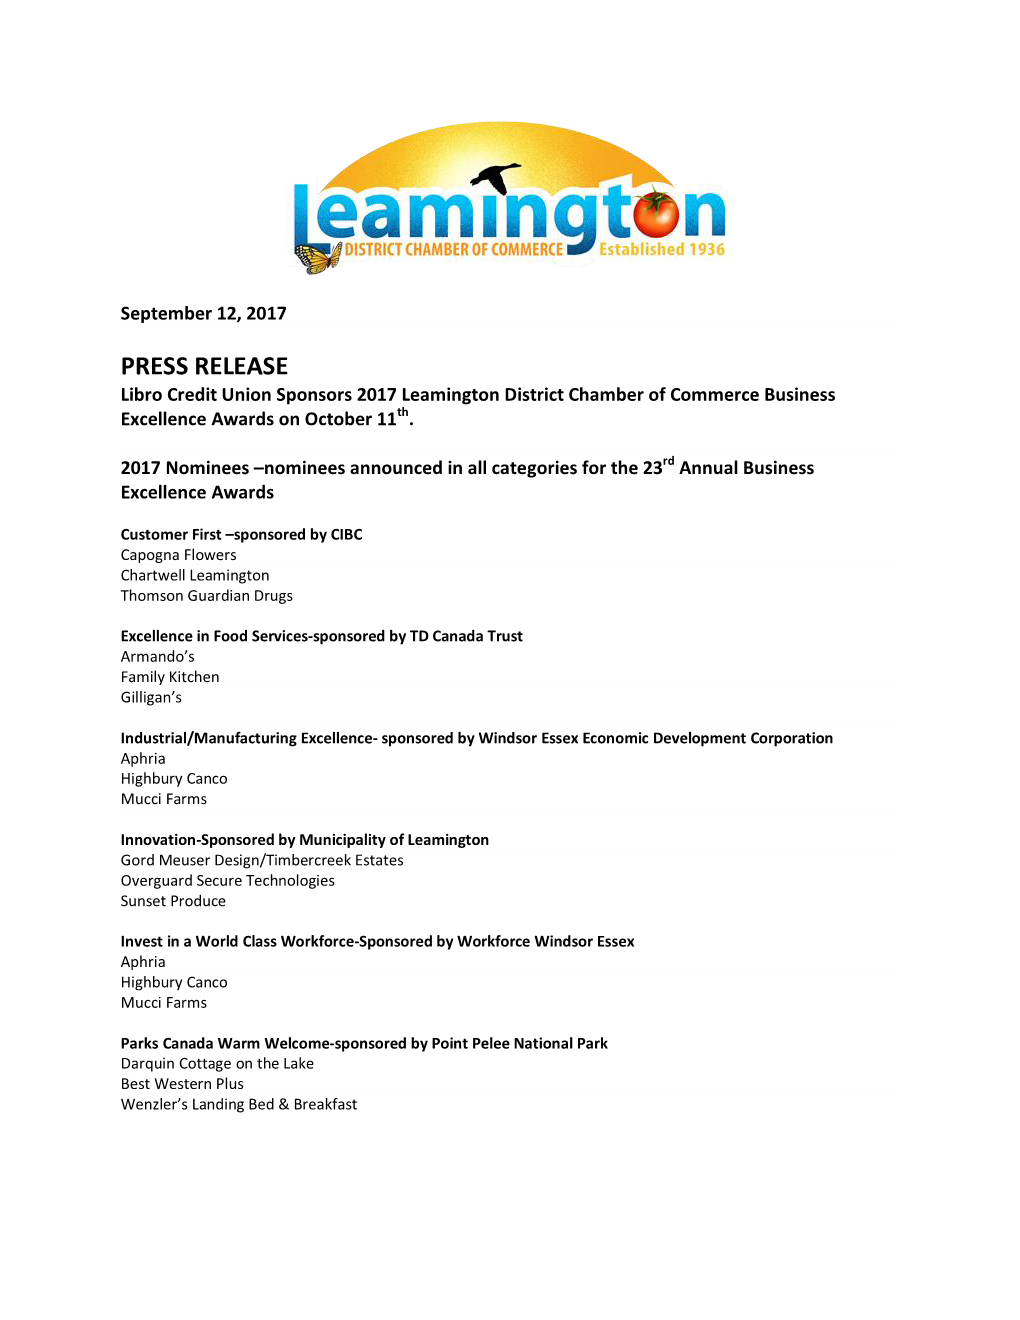 PRESS RELEASE Libro Credit Union Sponsors 2017 Leamington District Chamber of Commerce Business Excellence Awards on October 11Th